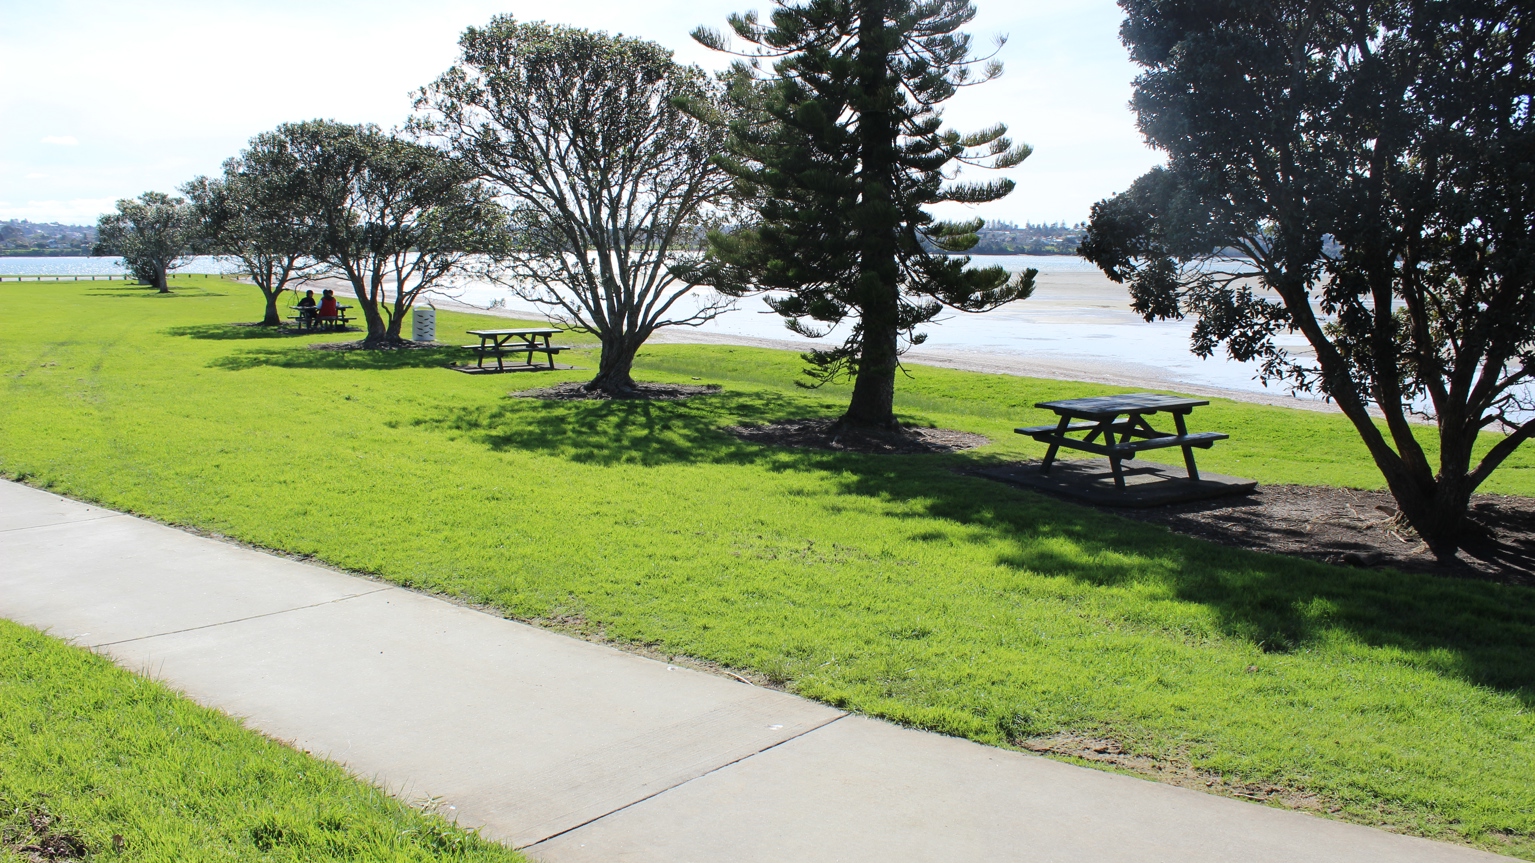 A flat, concrete path through a park by the water's edge. Under a line of trees are picnic tables.